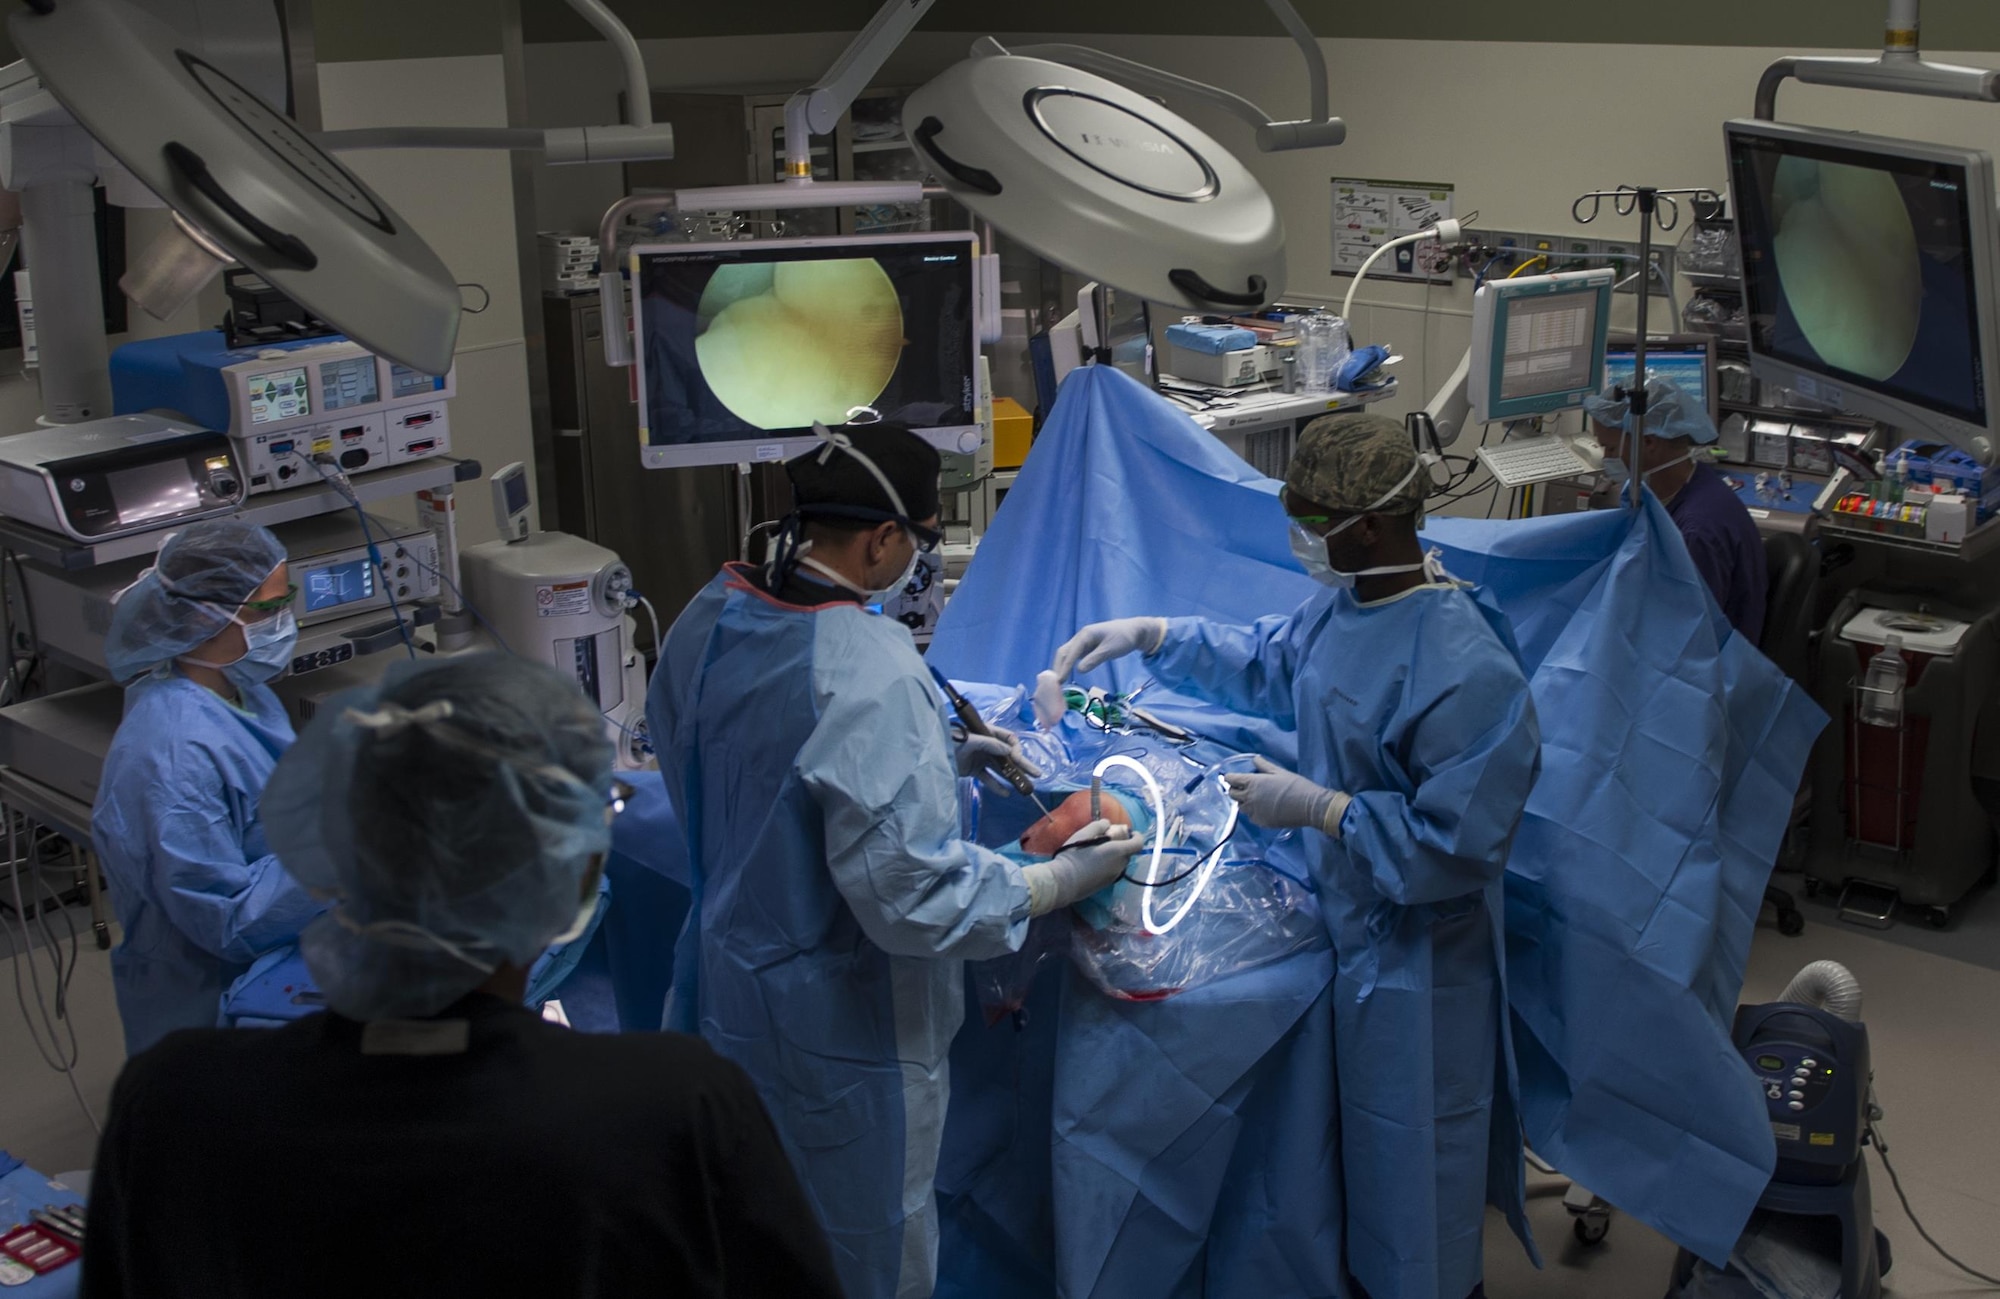 Airmen from the 99th Surgical Operations Squadron perform surgery to repair an Airman’s ACL at the Mike O’Callaghan Federal Medical Center on Nellis Air Force Base, Nev., Oct. 17, 2016. The orthopedic unit performs a number of surgeries including sports-type arthroscopy, and treatment of rotator cuff disorders, instability of the shoulder procedures, to ligament, meniscal surgeries and total joint arthroplasties for the knees and hips. (U.S. Air Force photo by Airman 1st Class Kevin Tanenbaum/Released)